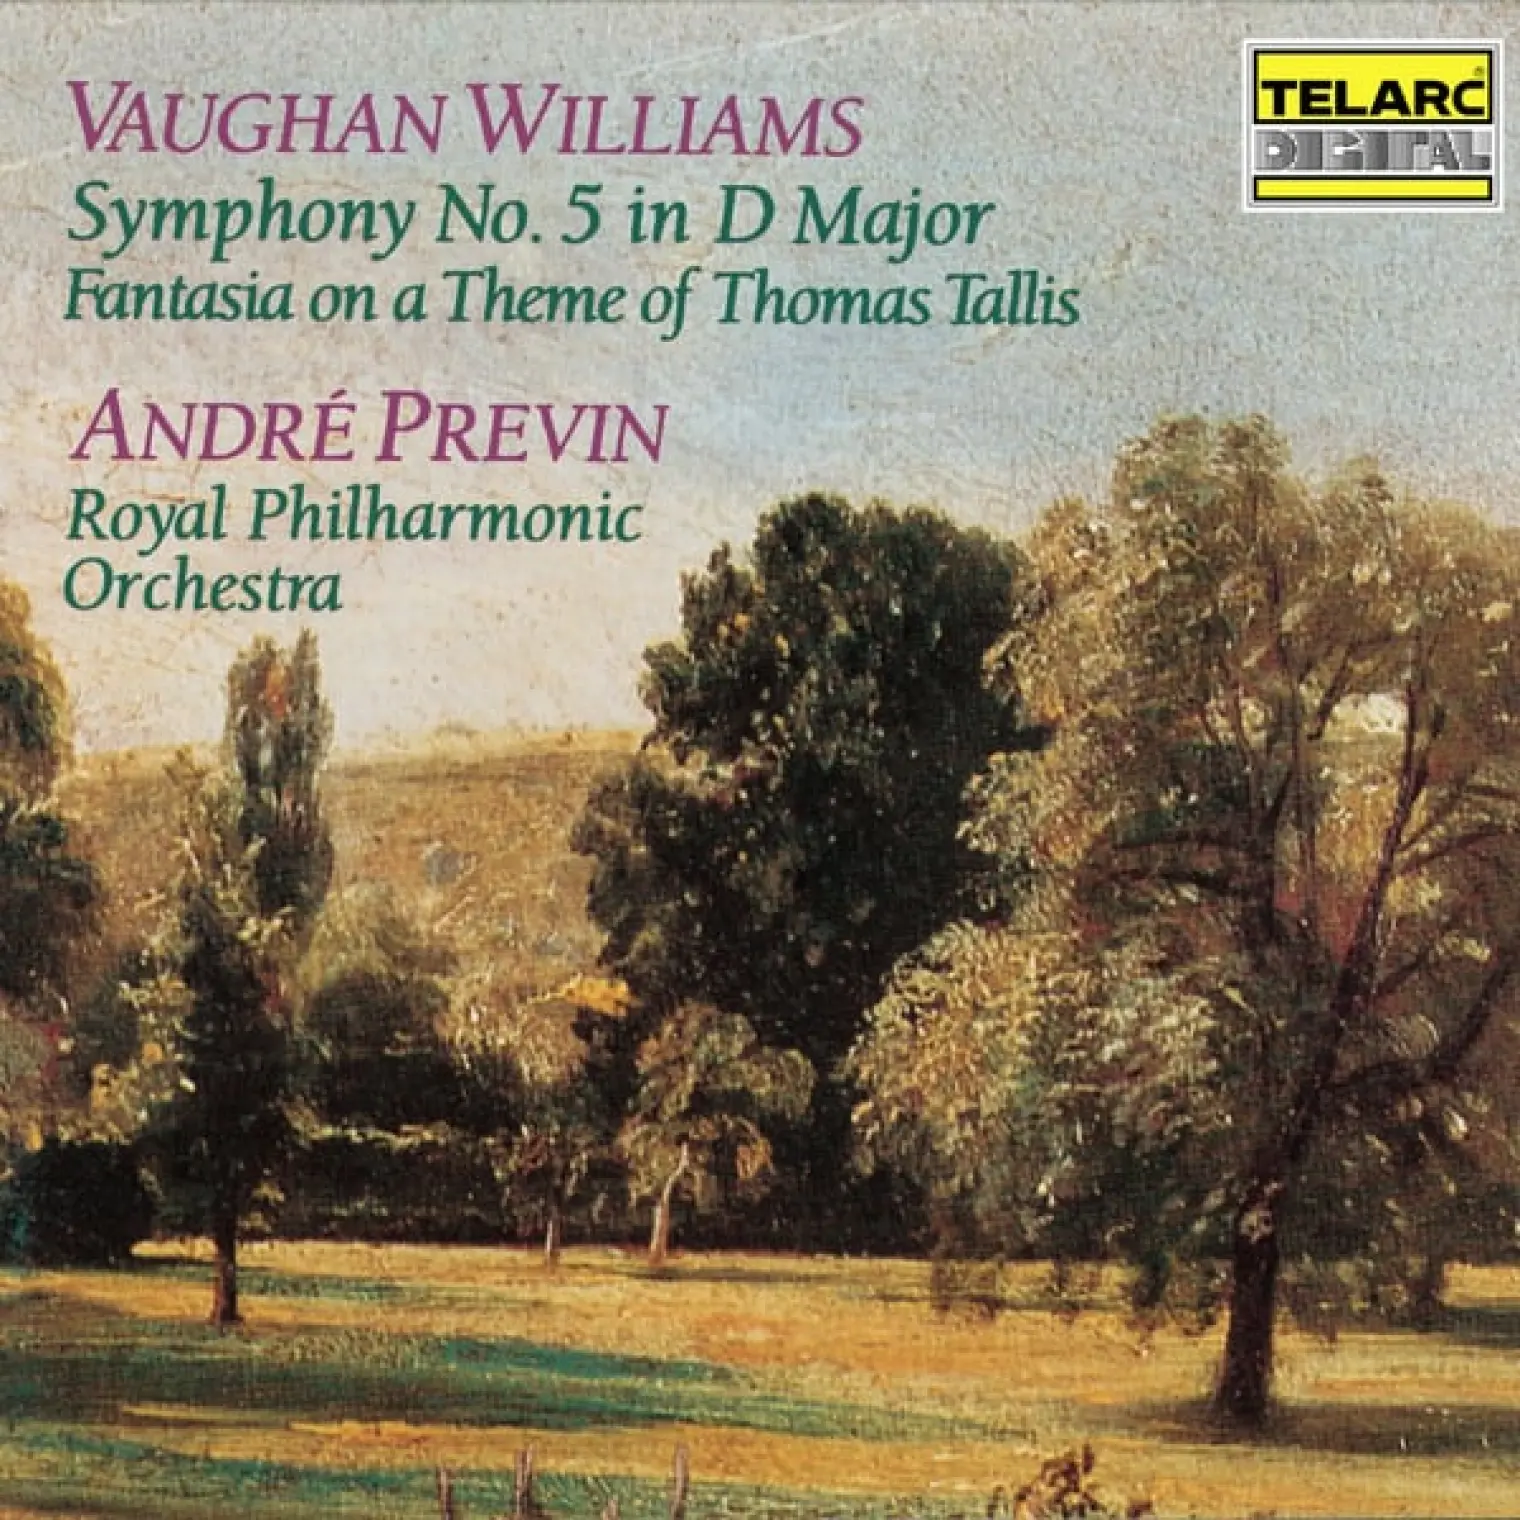 Vaughan Williams: Symphony No. 5 in D Major & Fantasia on a Theme of Thomas Tallis -  André Previn 